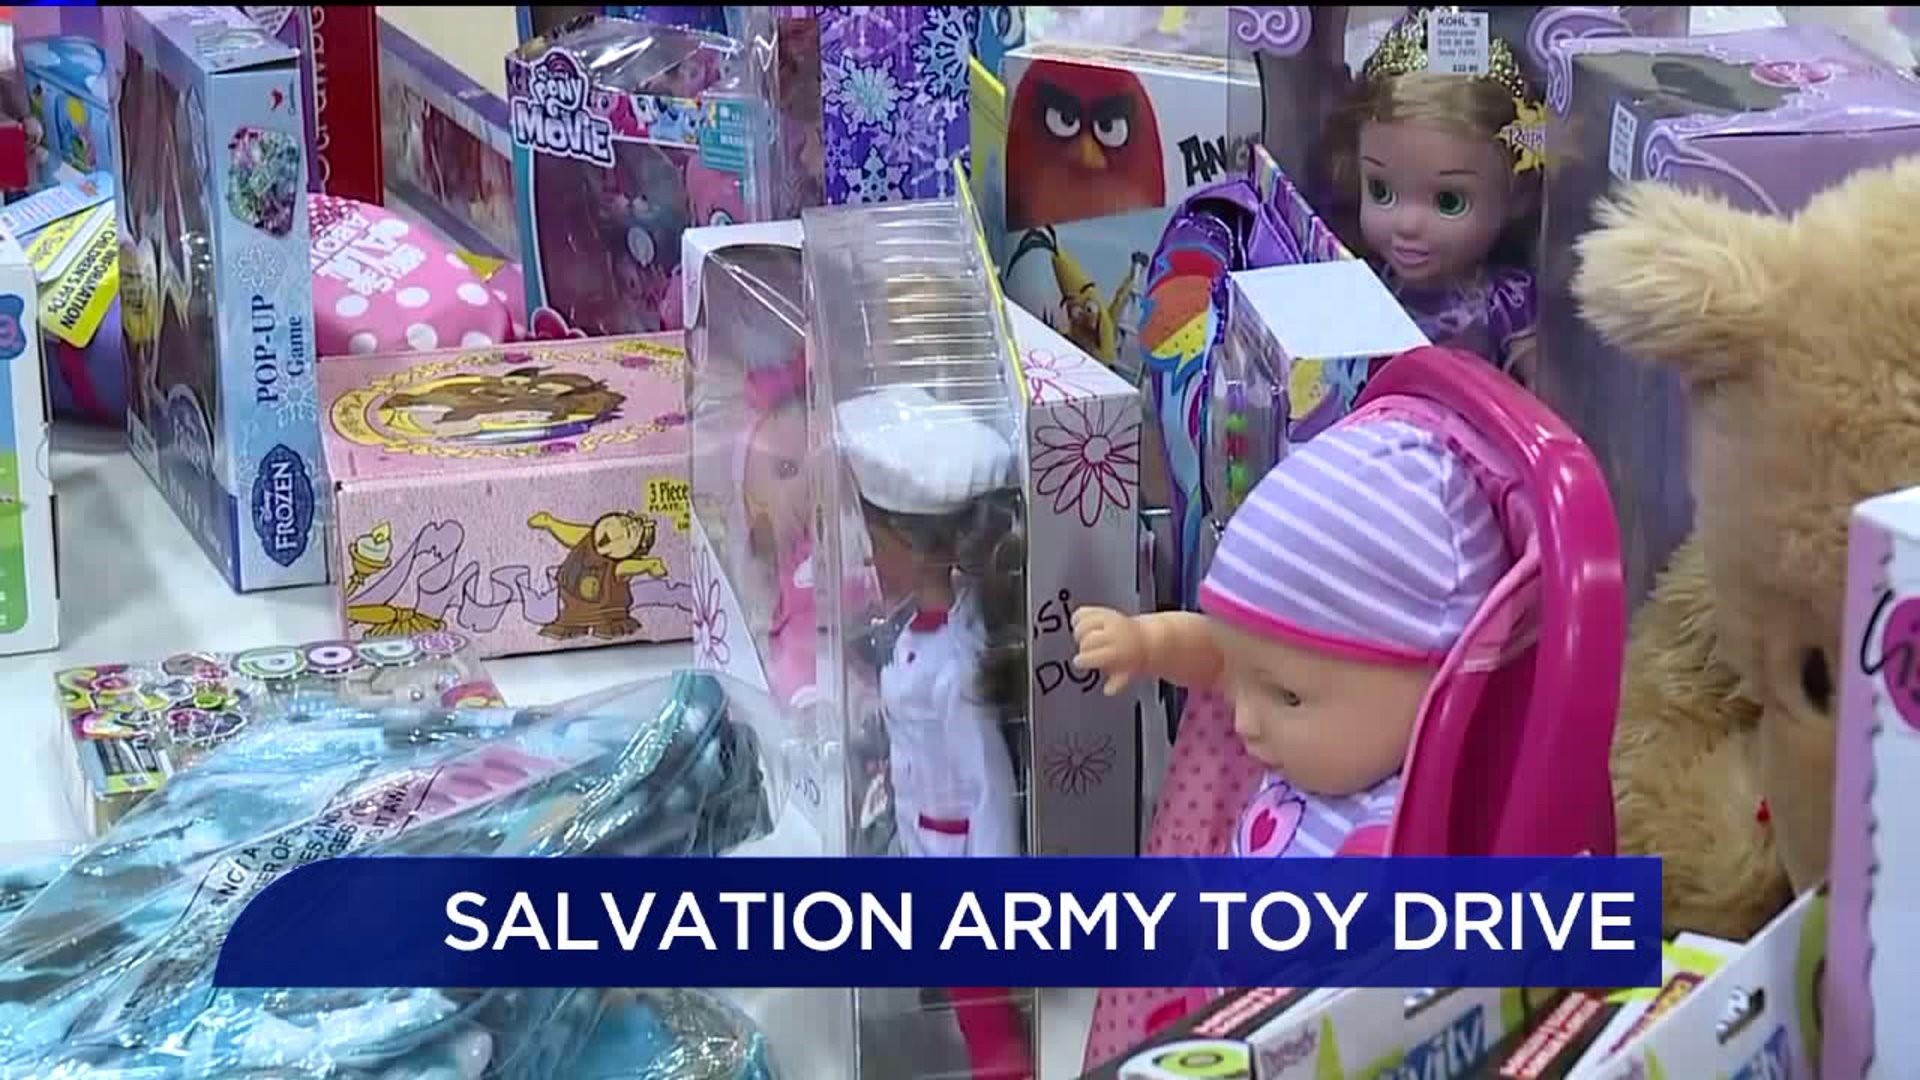 Williamsport Salvation Army Making Sure All Families Have a Happy Holiday Season